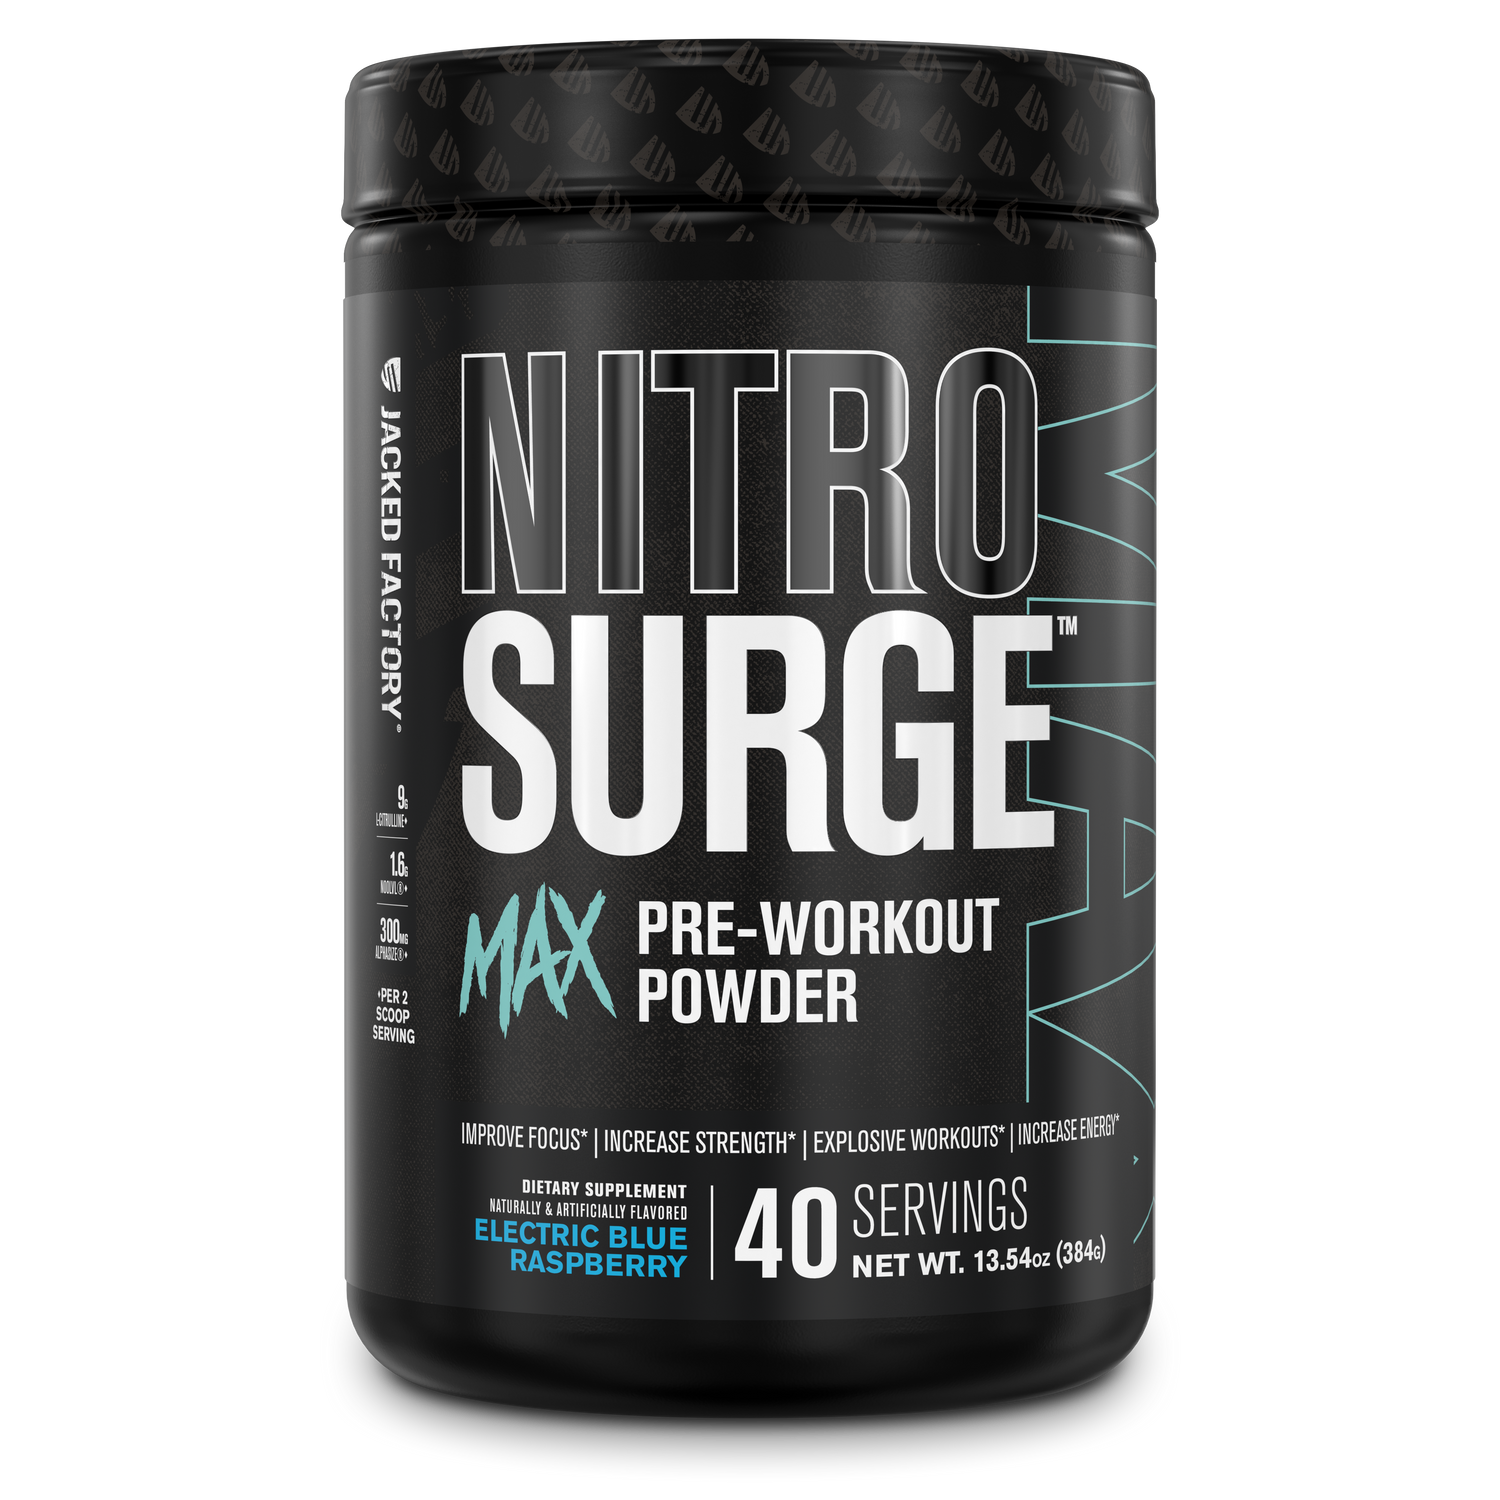 Jacked Factory Nitrosurge MAX Pre Workout Powder (40 servings) Electric Blue Raspberry in a black tub with a black label and black lid